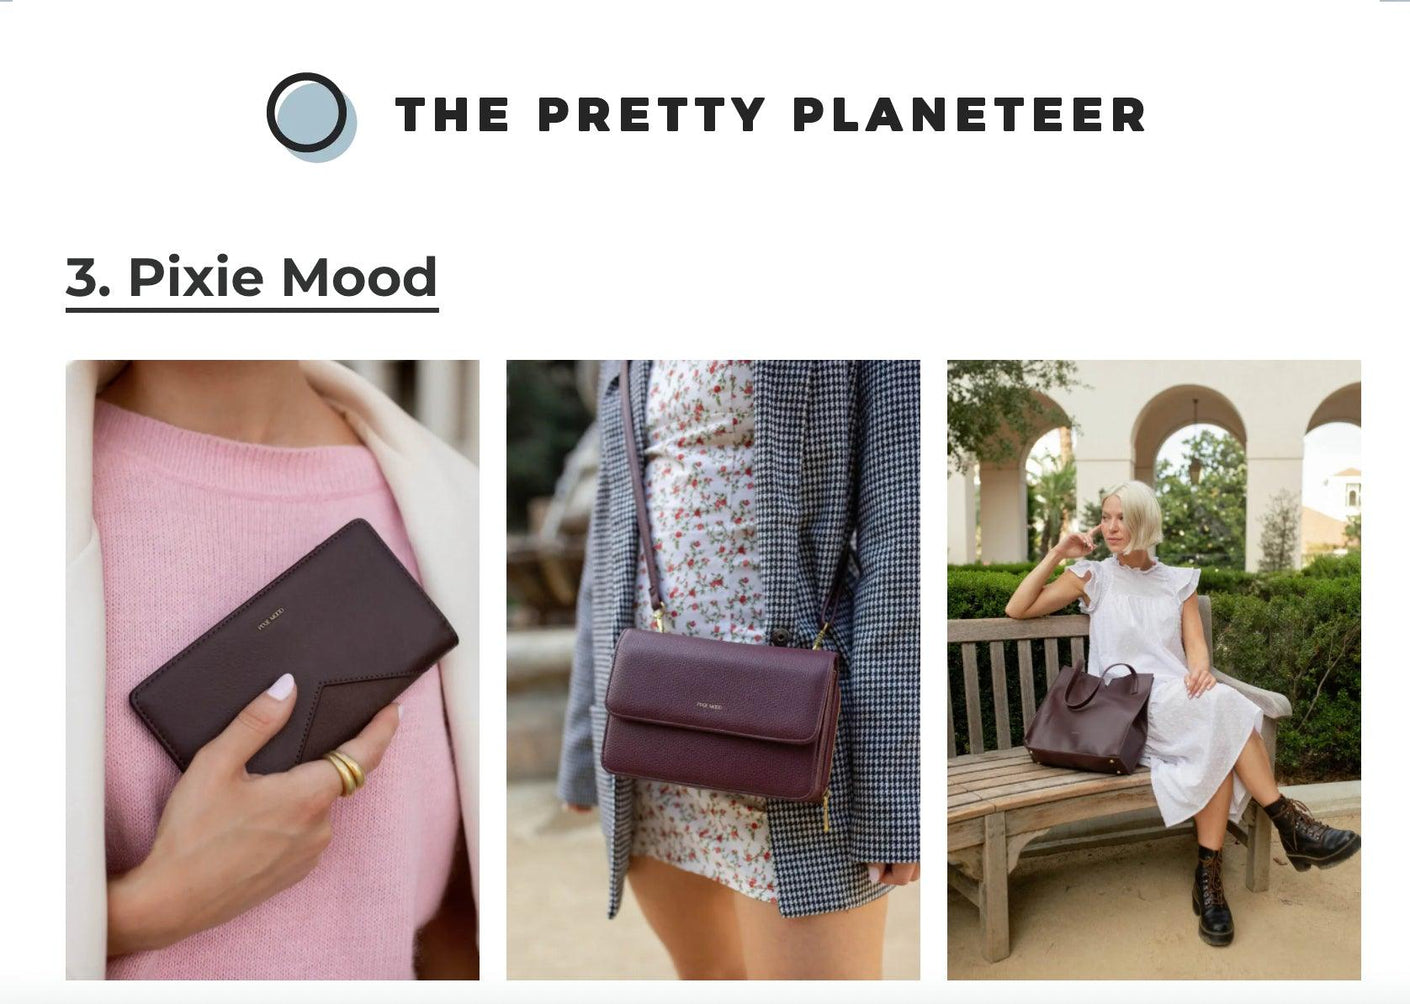 The Pretty Planeteer: The Best Vegan & Cruelty-Free Fashion Brands in Canada - Pixie Mood Vegan Leather Bags